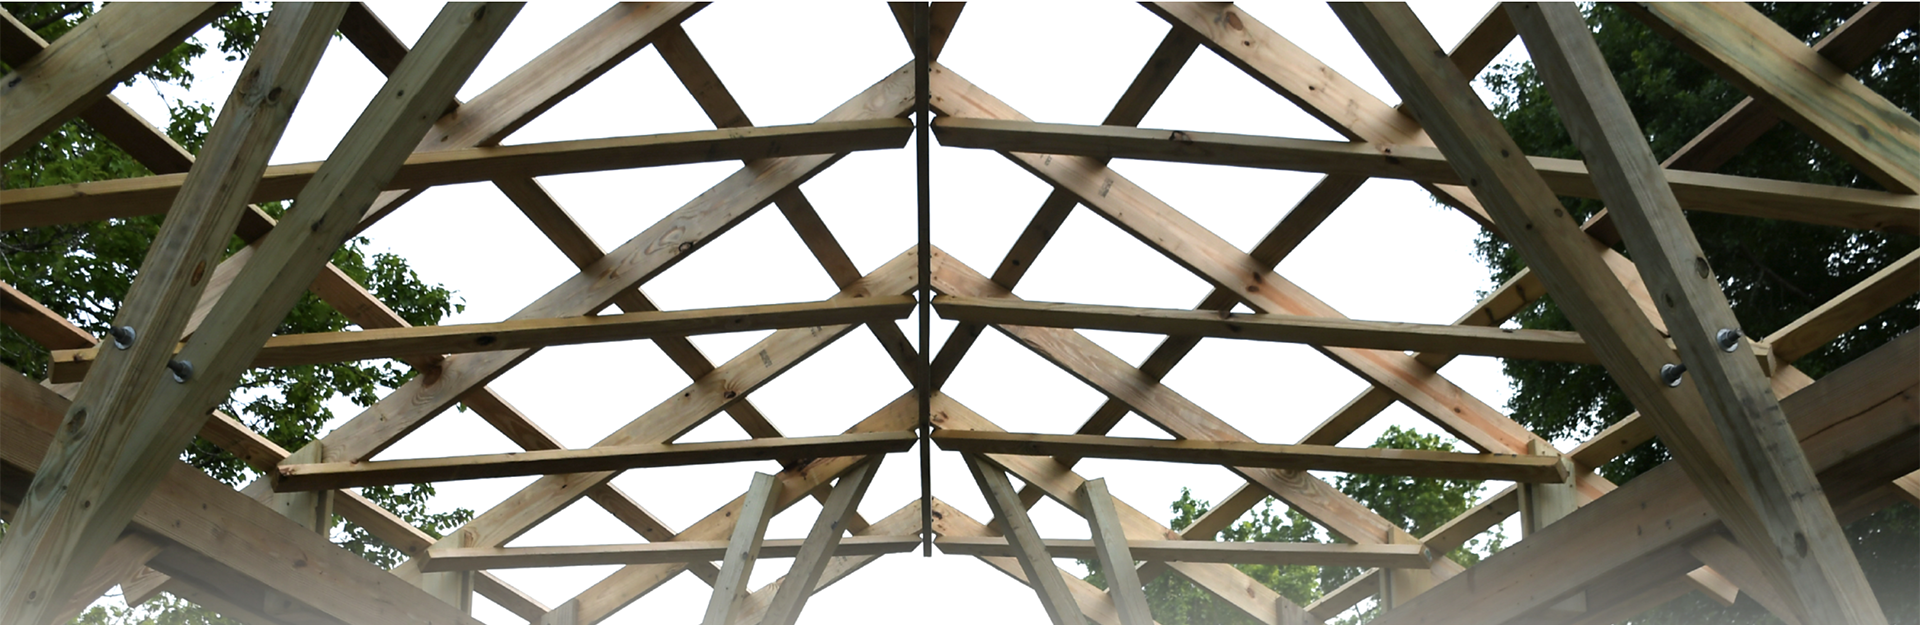 Image of wooden building frame construction